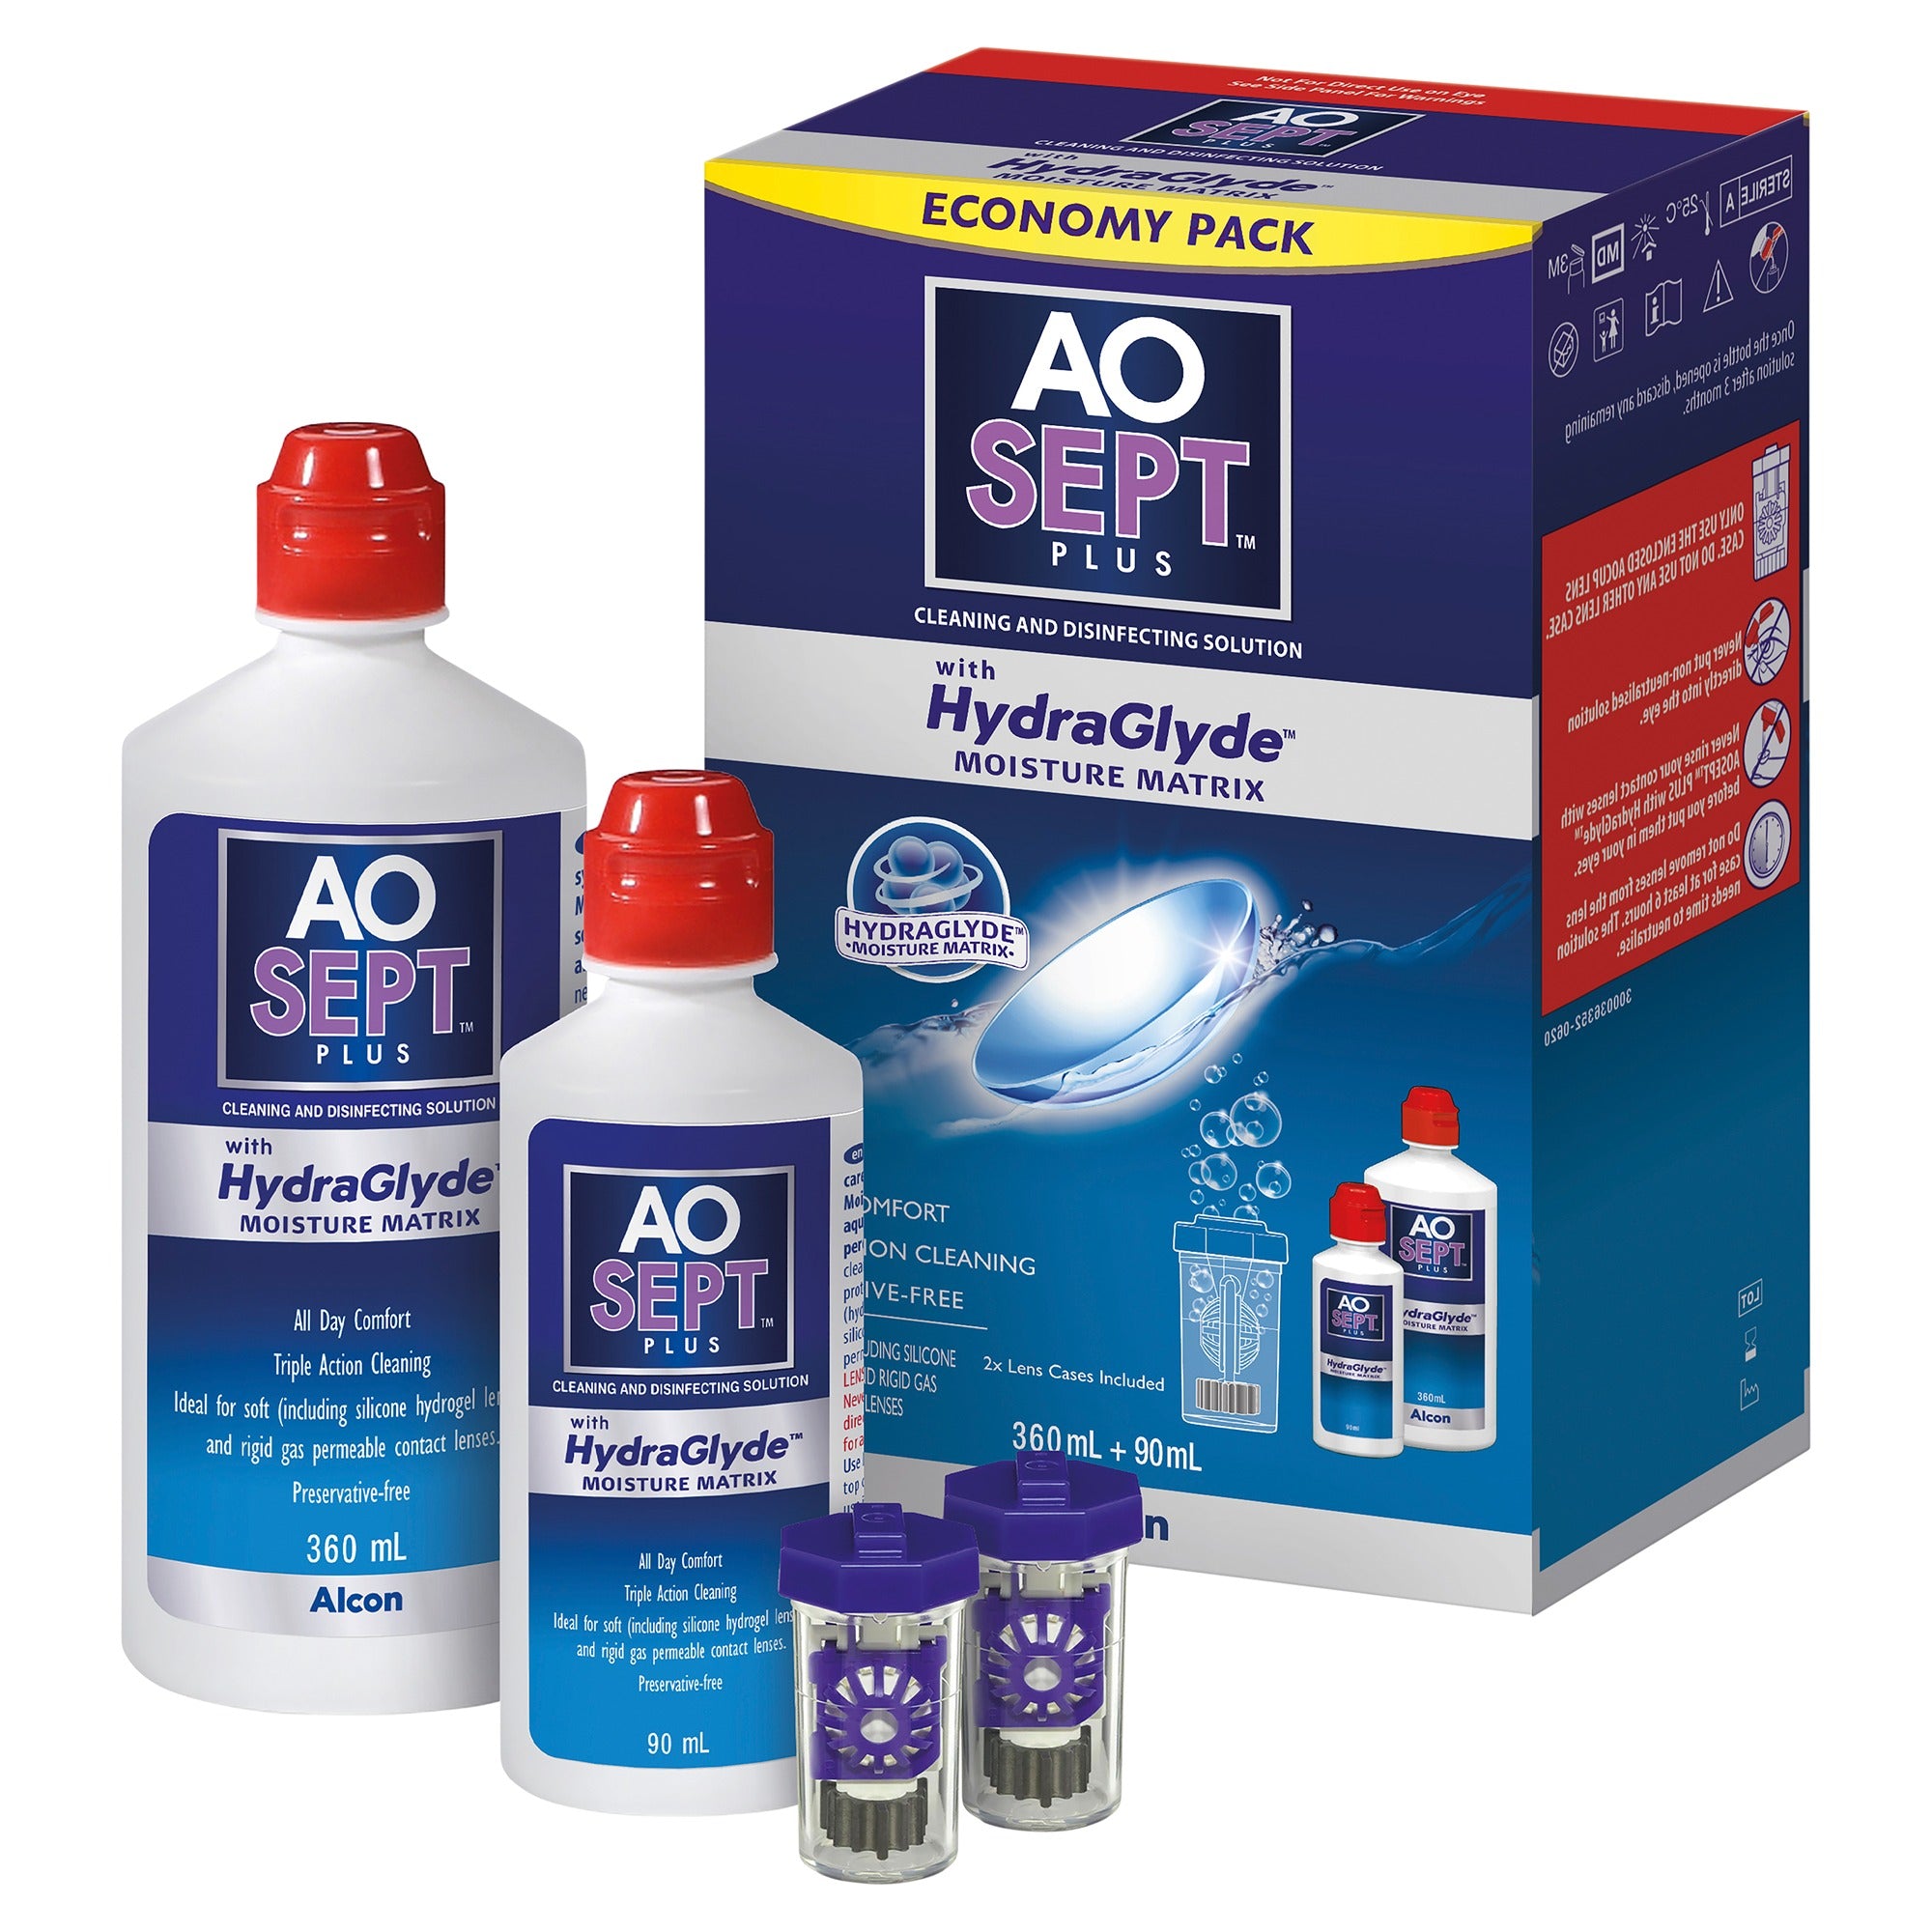 AOSEPT PLUS with HydraGlyde Contact Lens Solution Economy Pack 360mL + 90mL Bottle